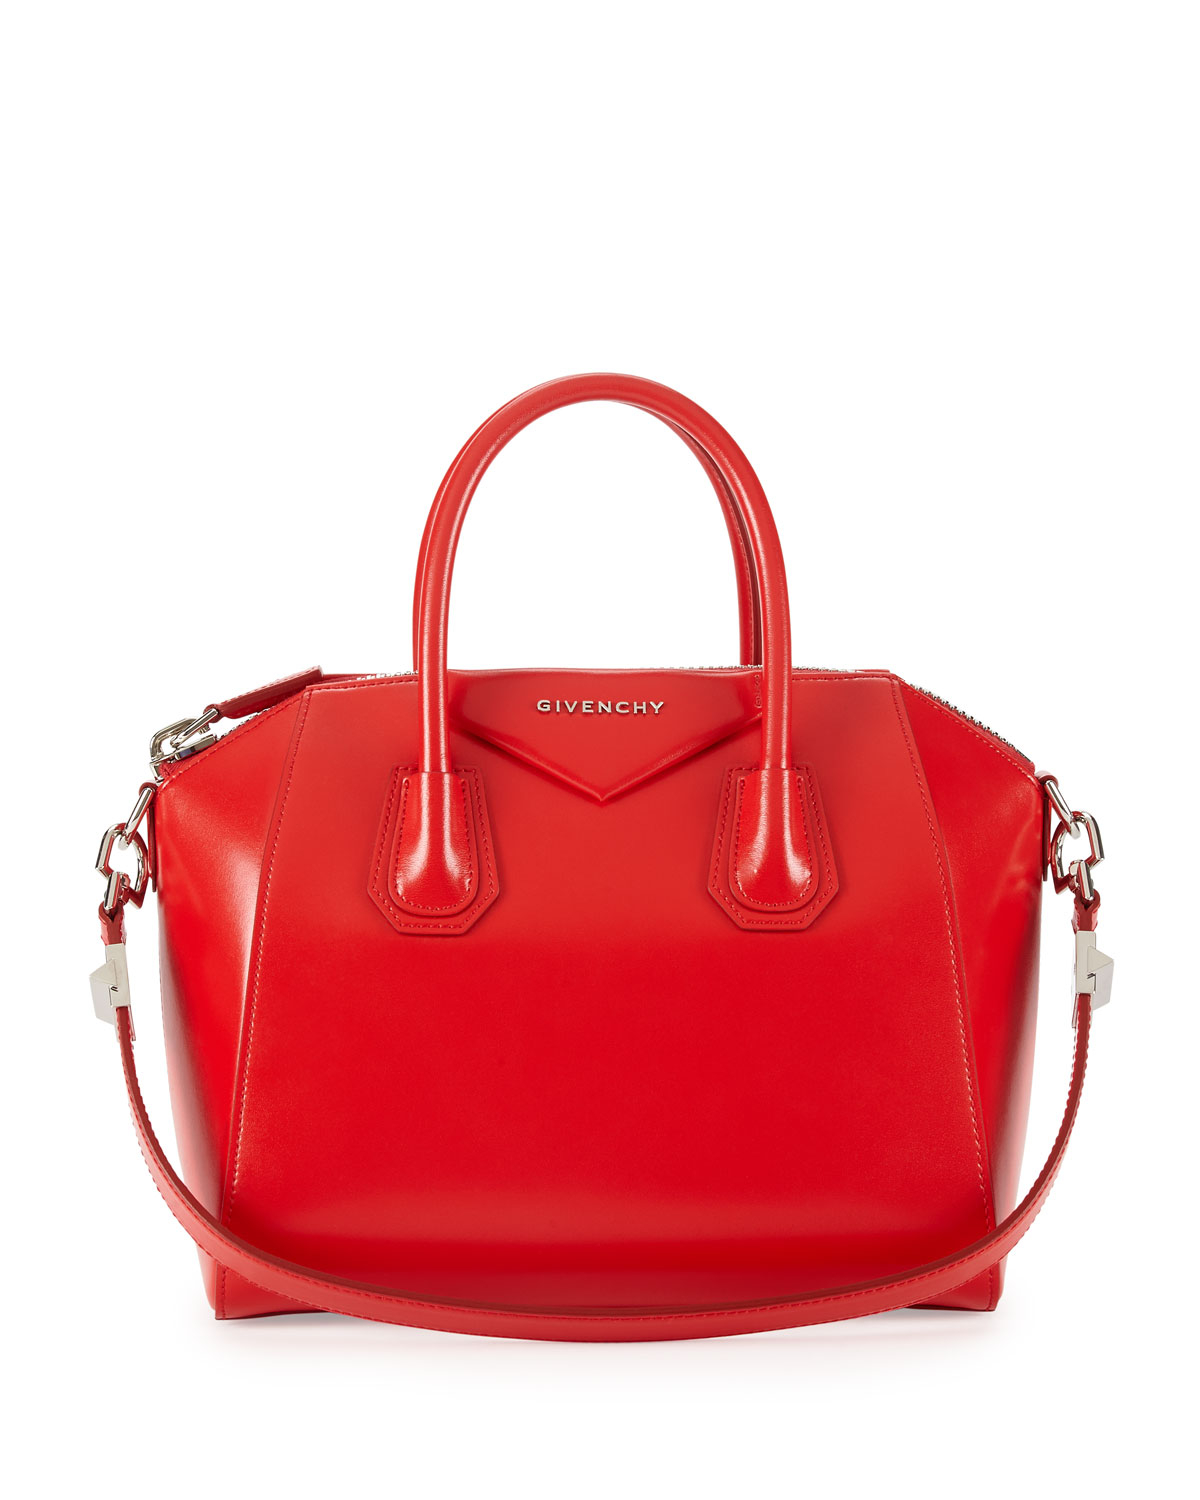 Lyst - Givenchy Antigona Small Leather Satchel Bag in Red